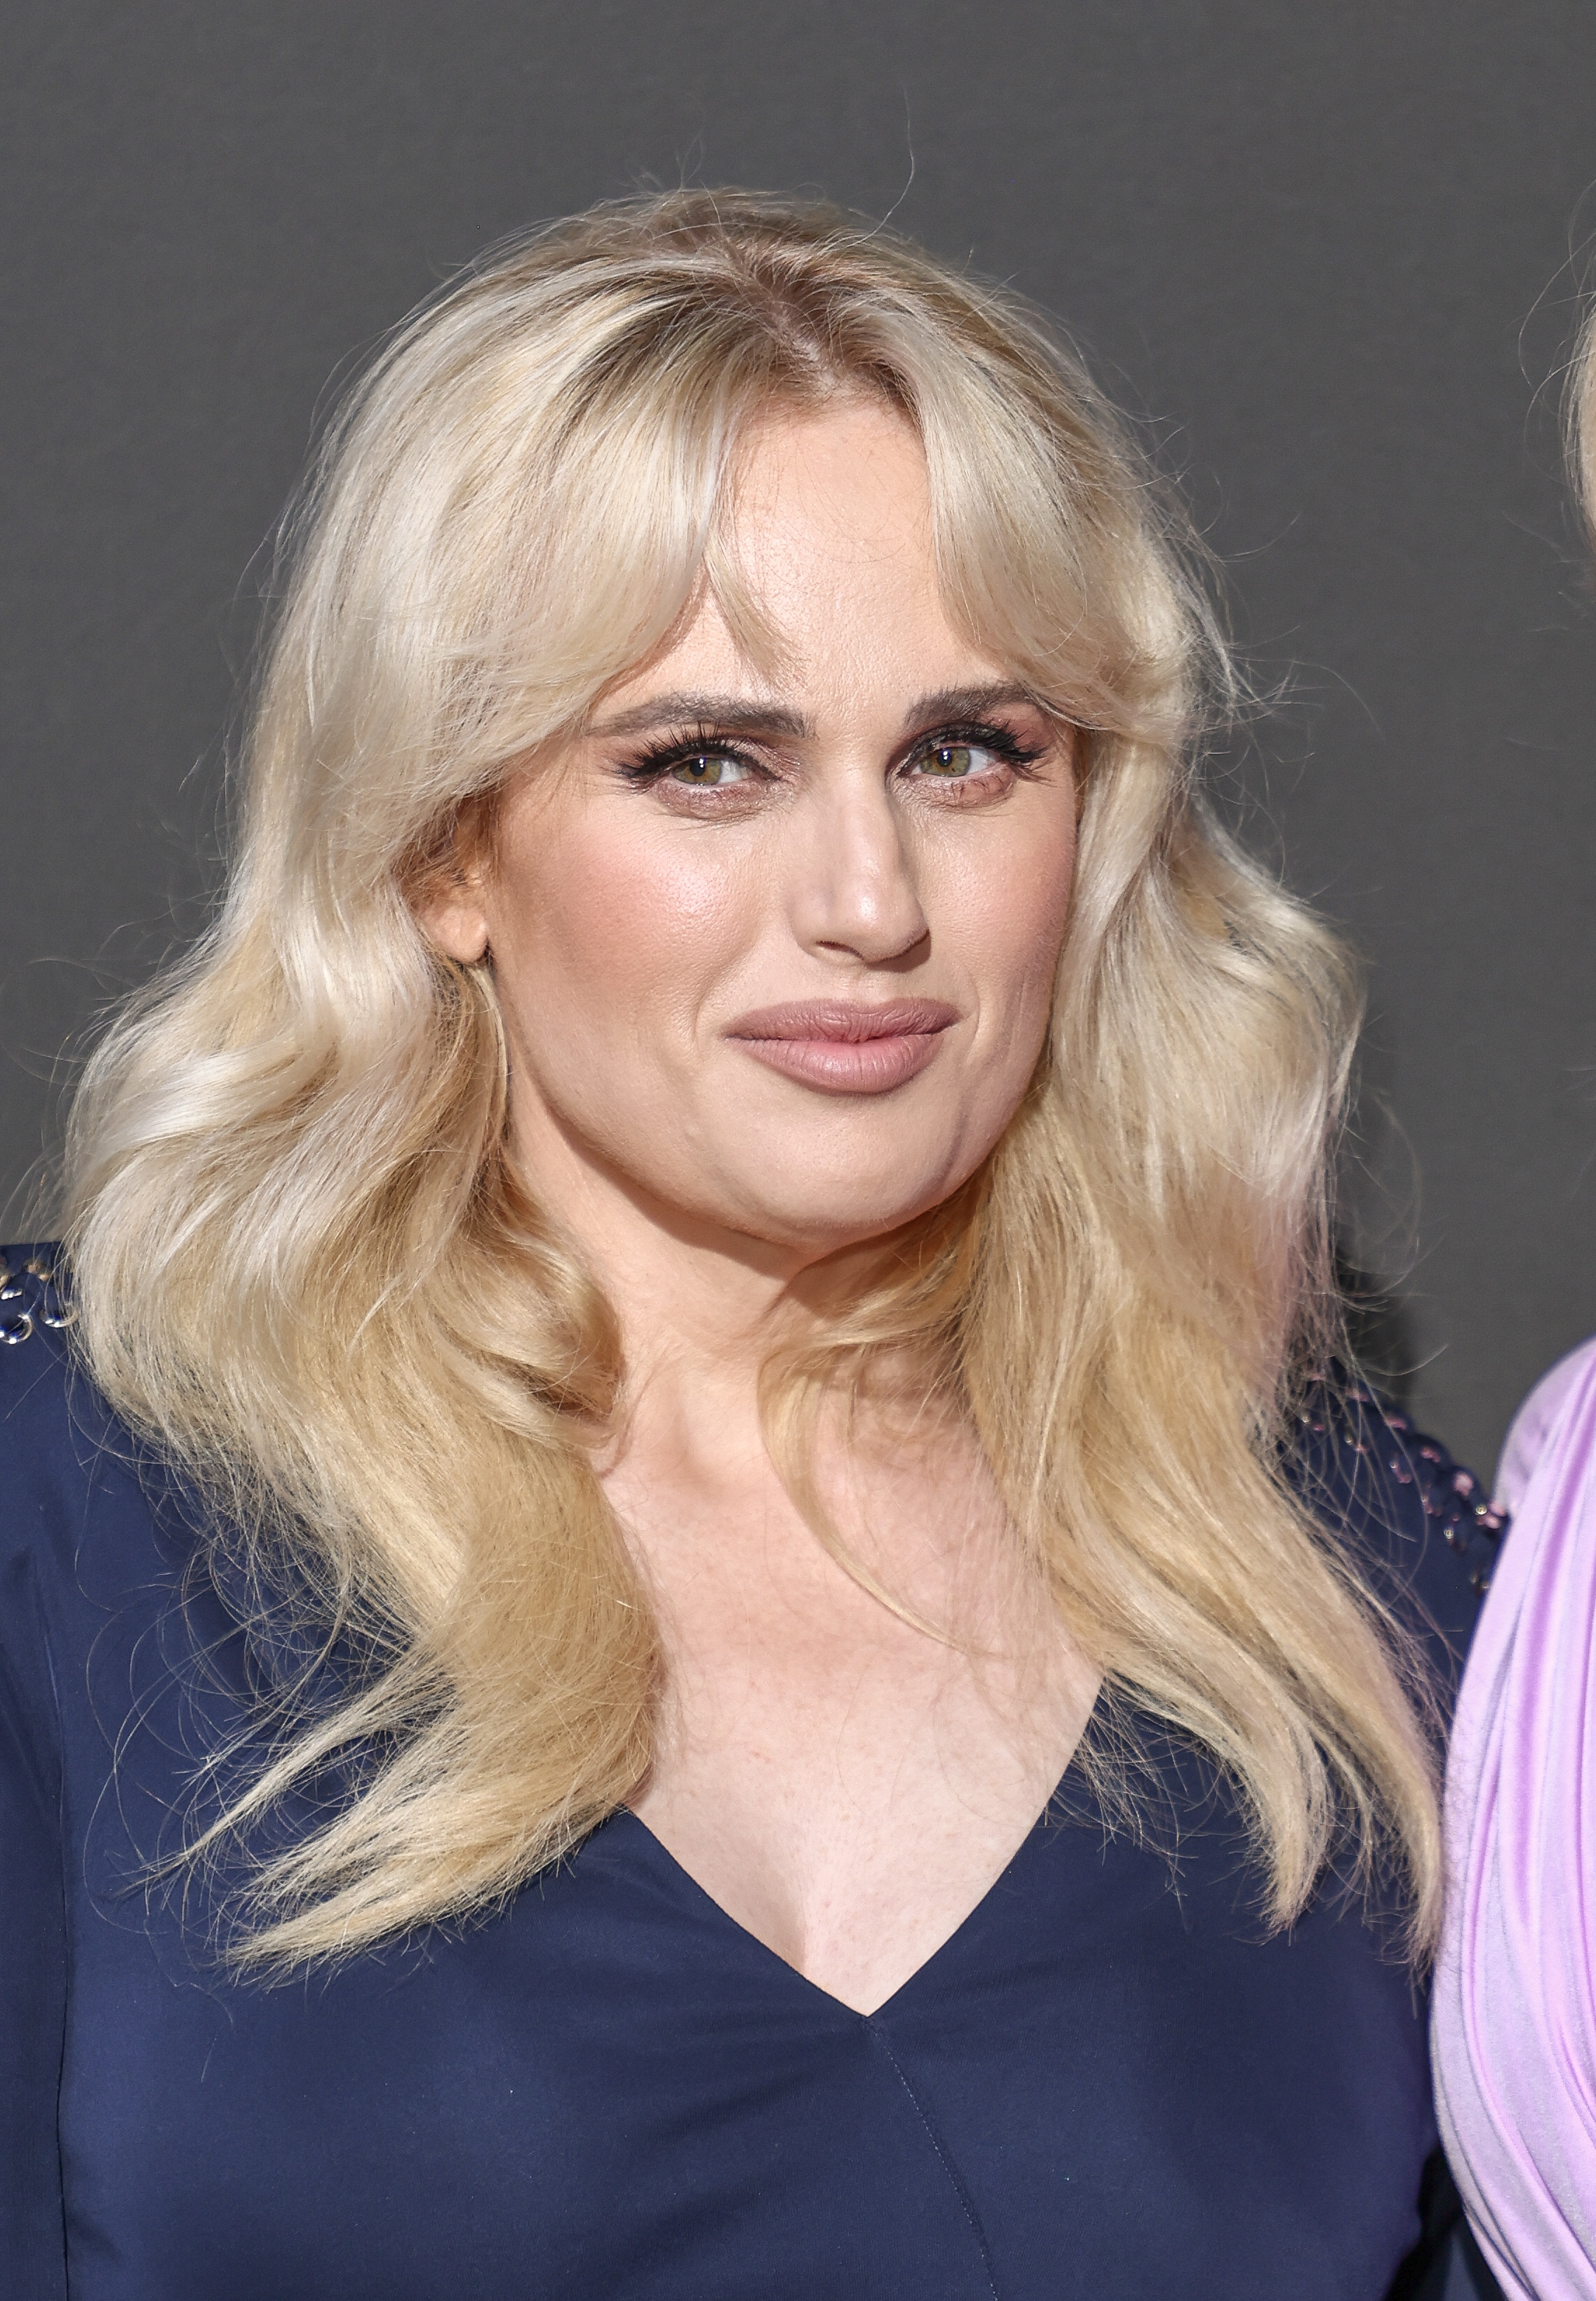 Rebel Wilson poses smiling in a navy outfit at an event